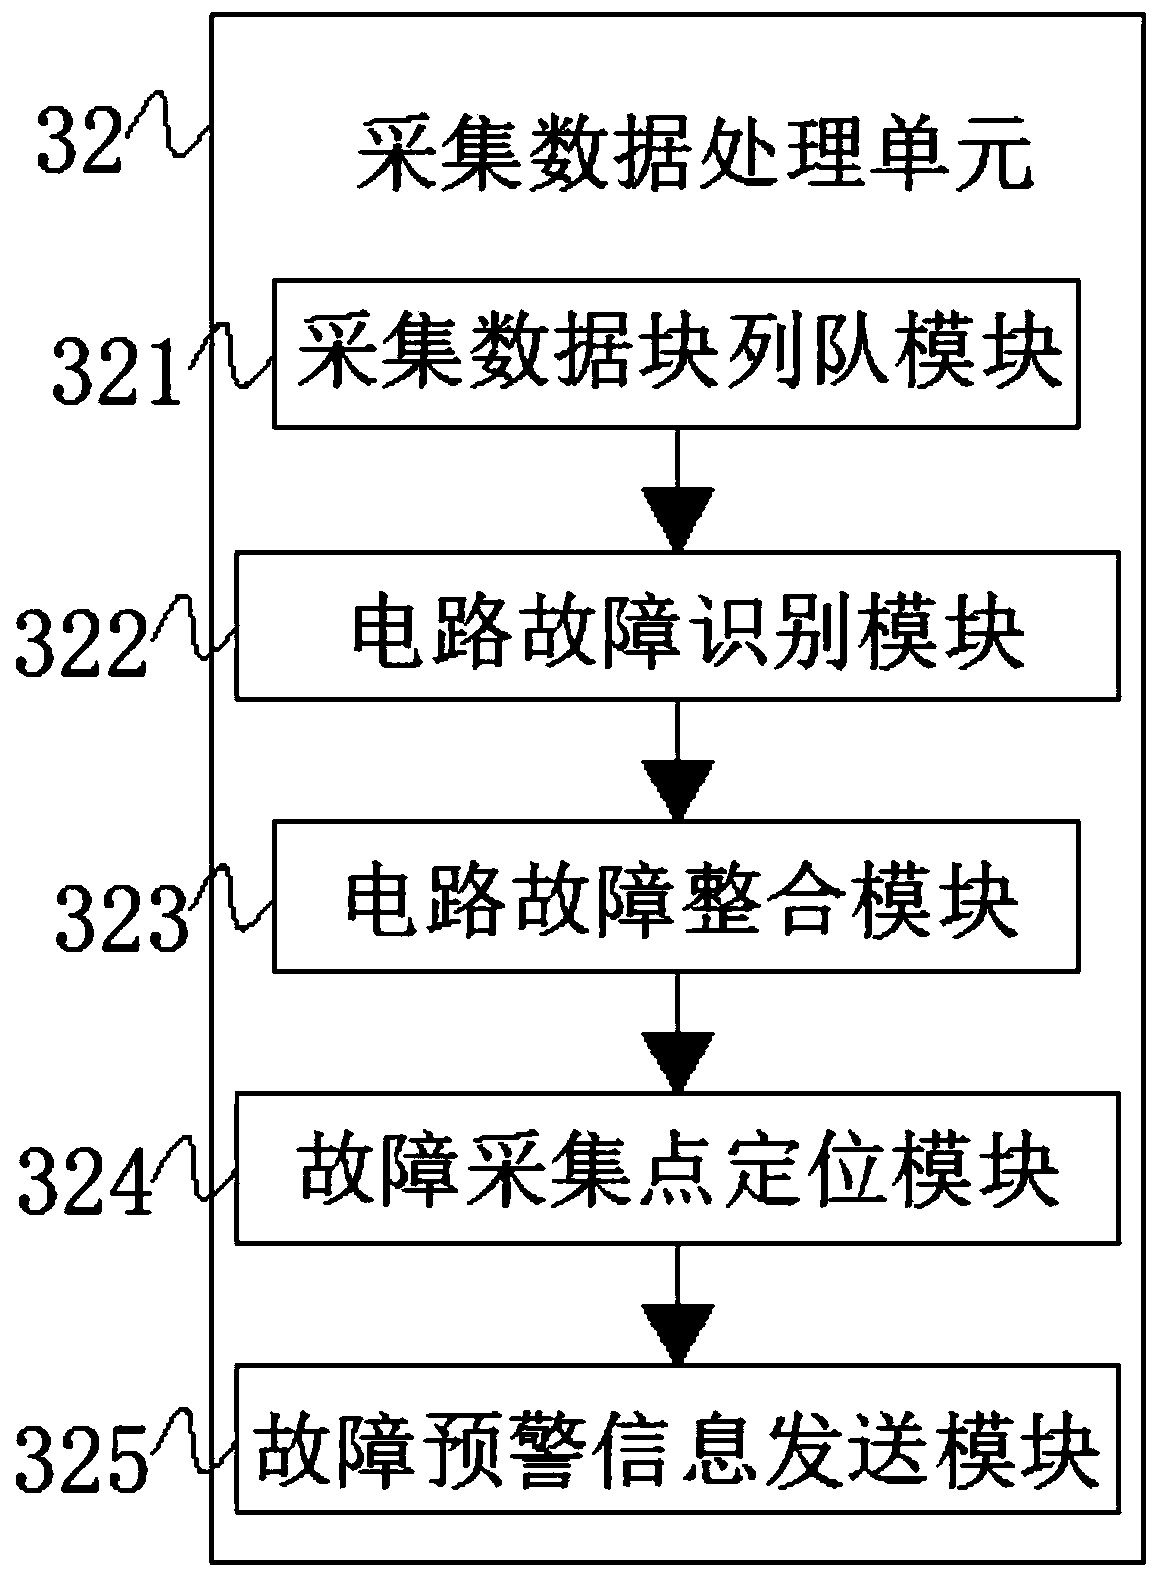 Remote monitoring management system of intelligent integrated switching power supply, and method